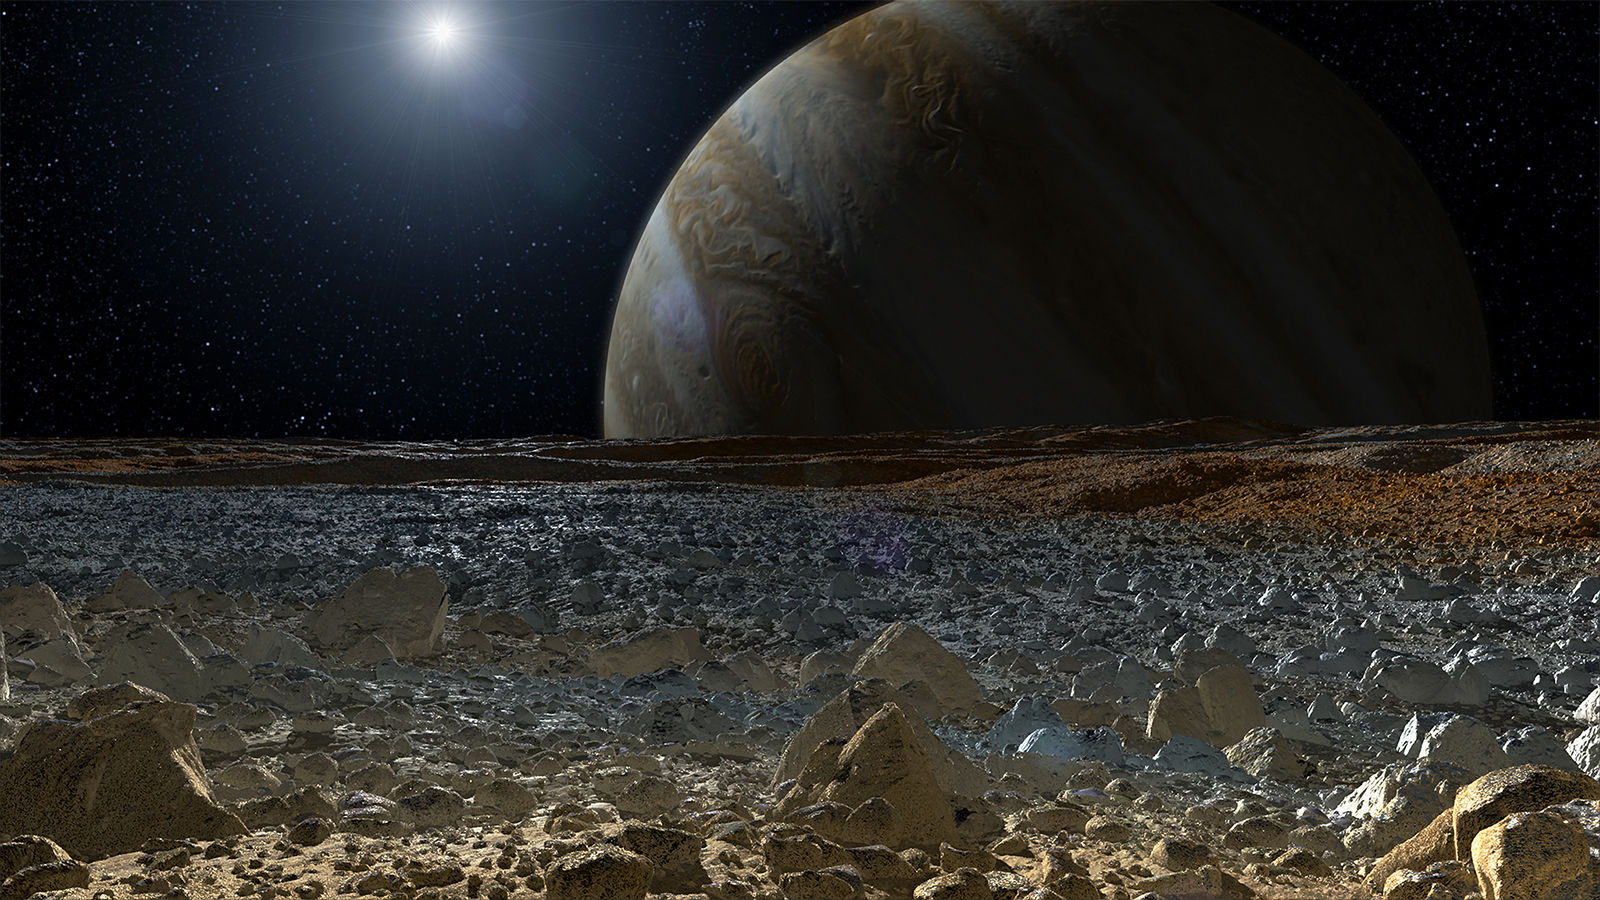 Artist's depiction of the jagged, icy surface on Europa, with Jupiter in the background.  (Image: NASA)